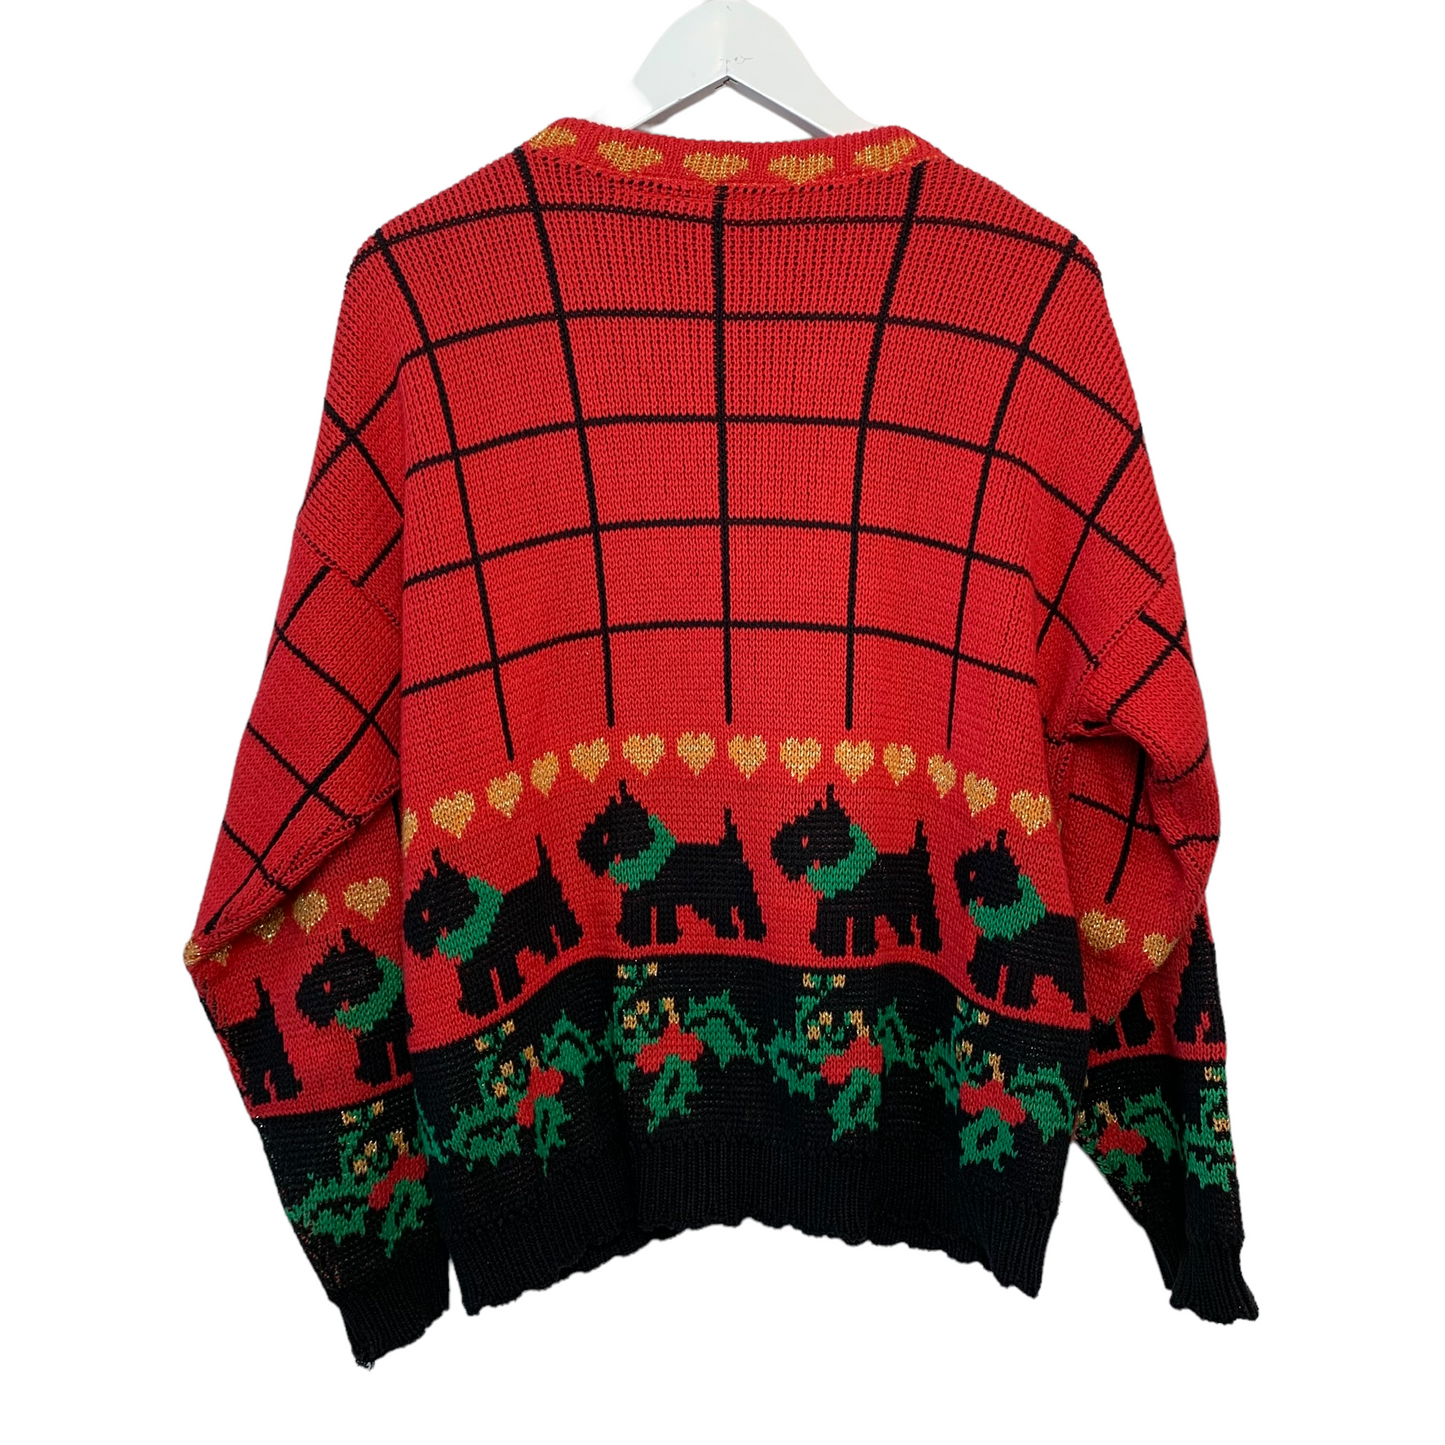 Vintage 80s Sweater Loft NY Scottie Dogs Red Christmas Cardigan Sweater Made in the USA Medium